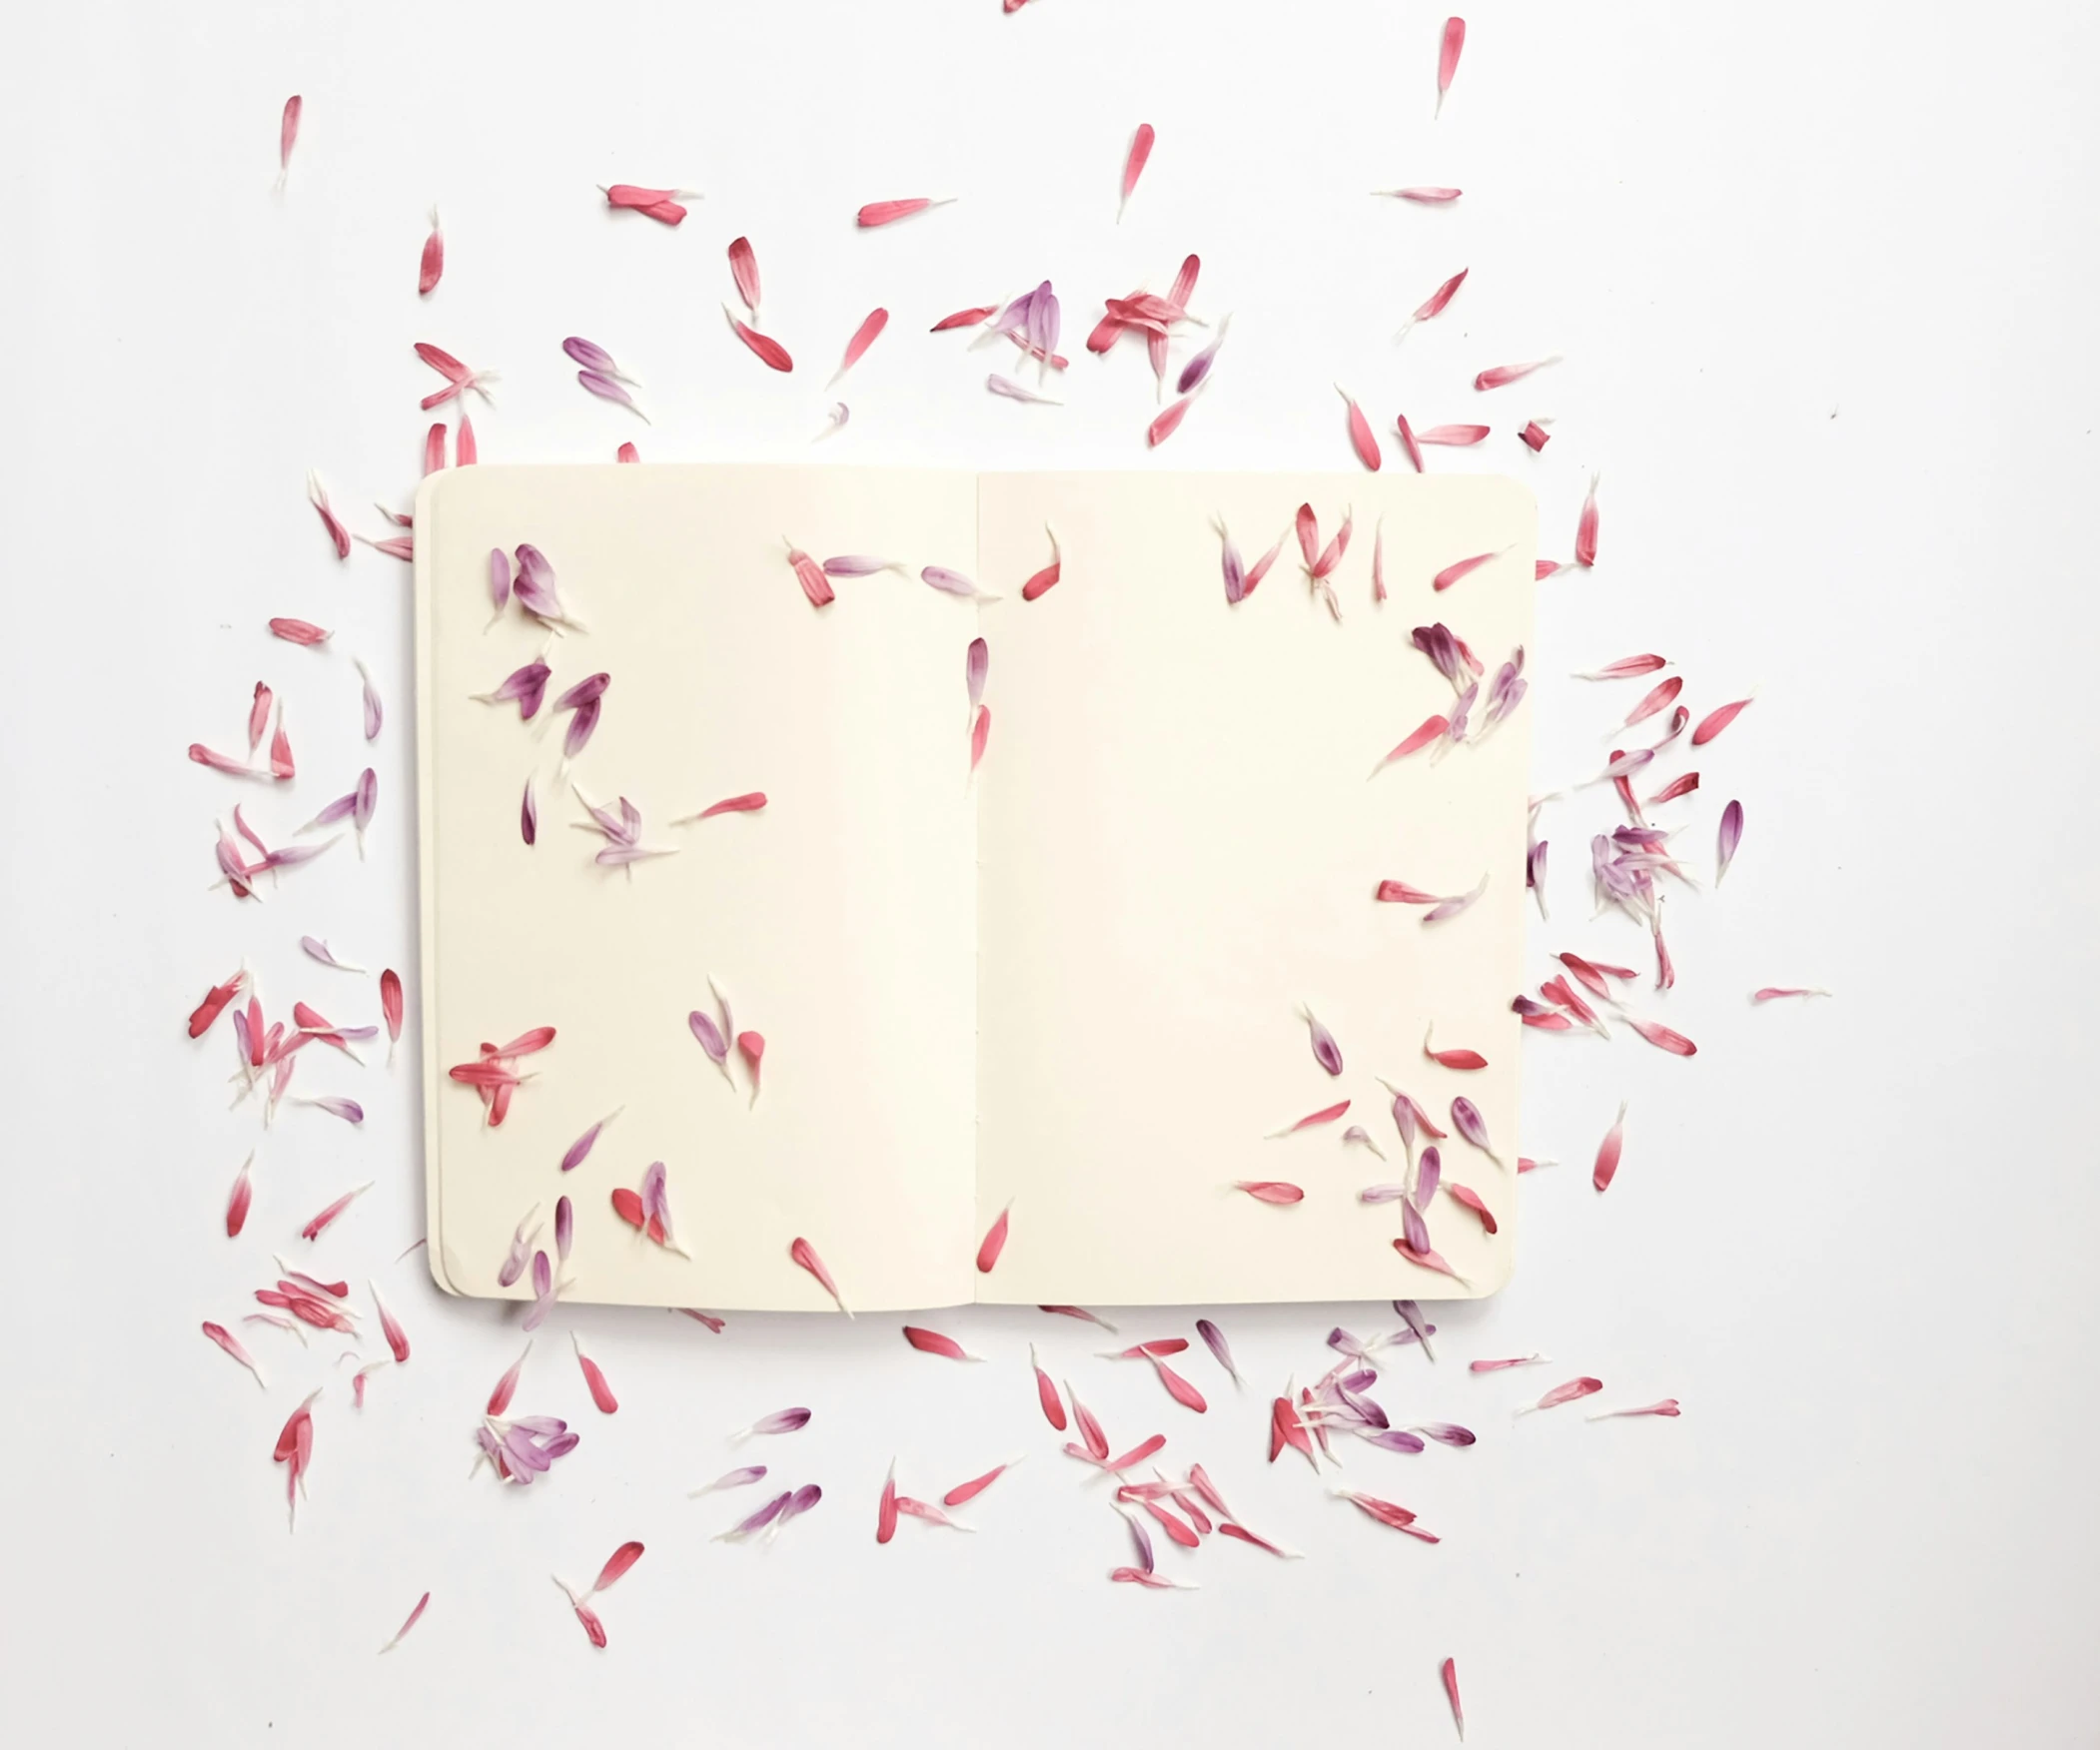 an open journal with red speckles flying in the air